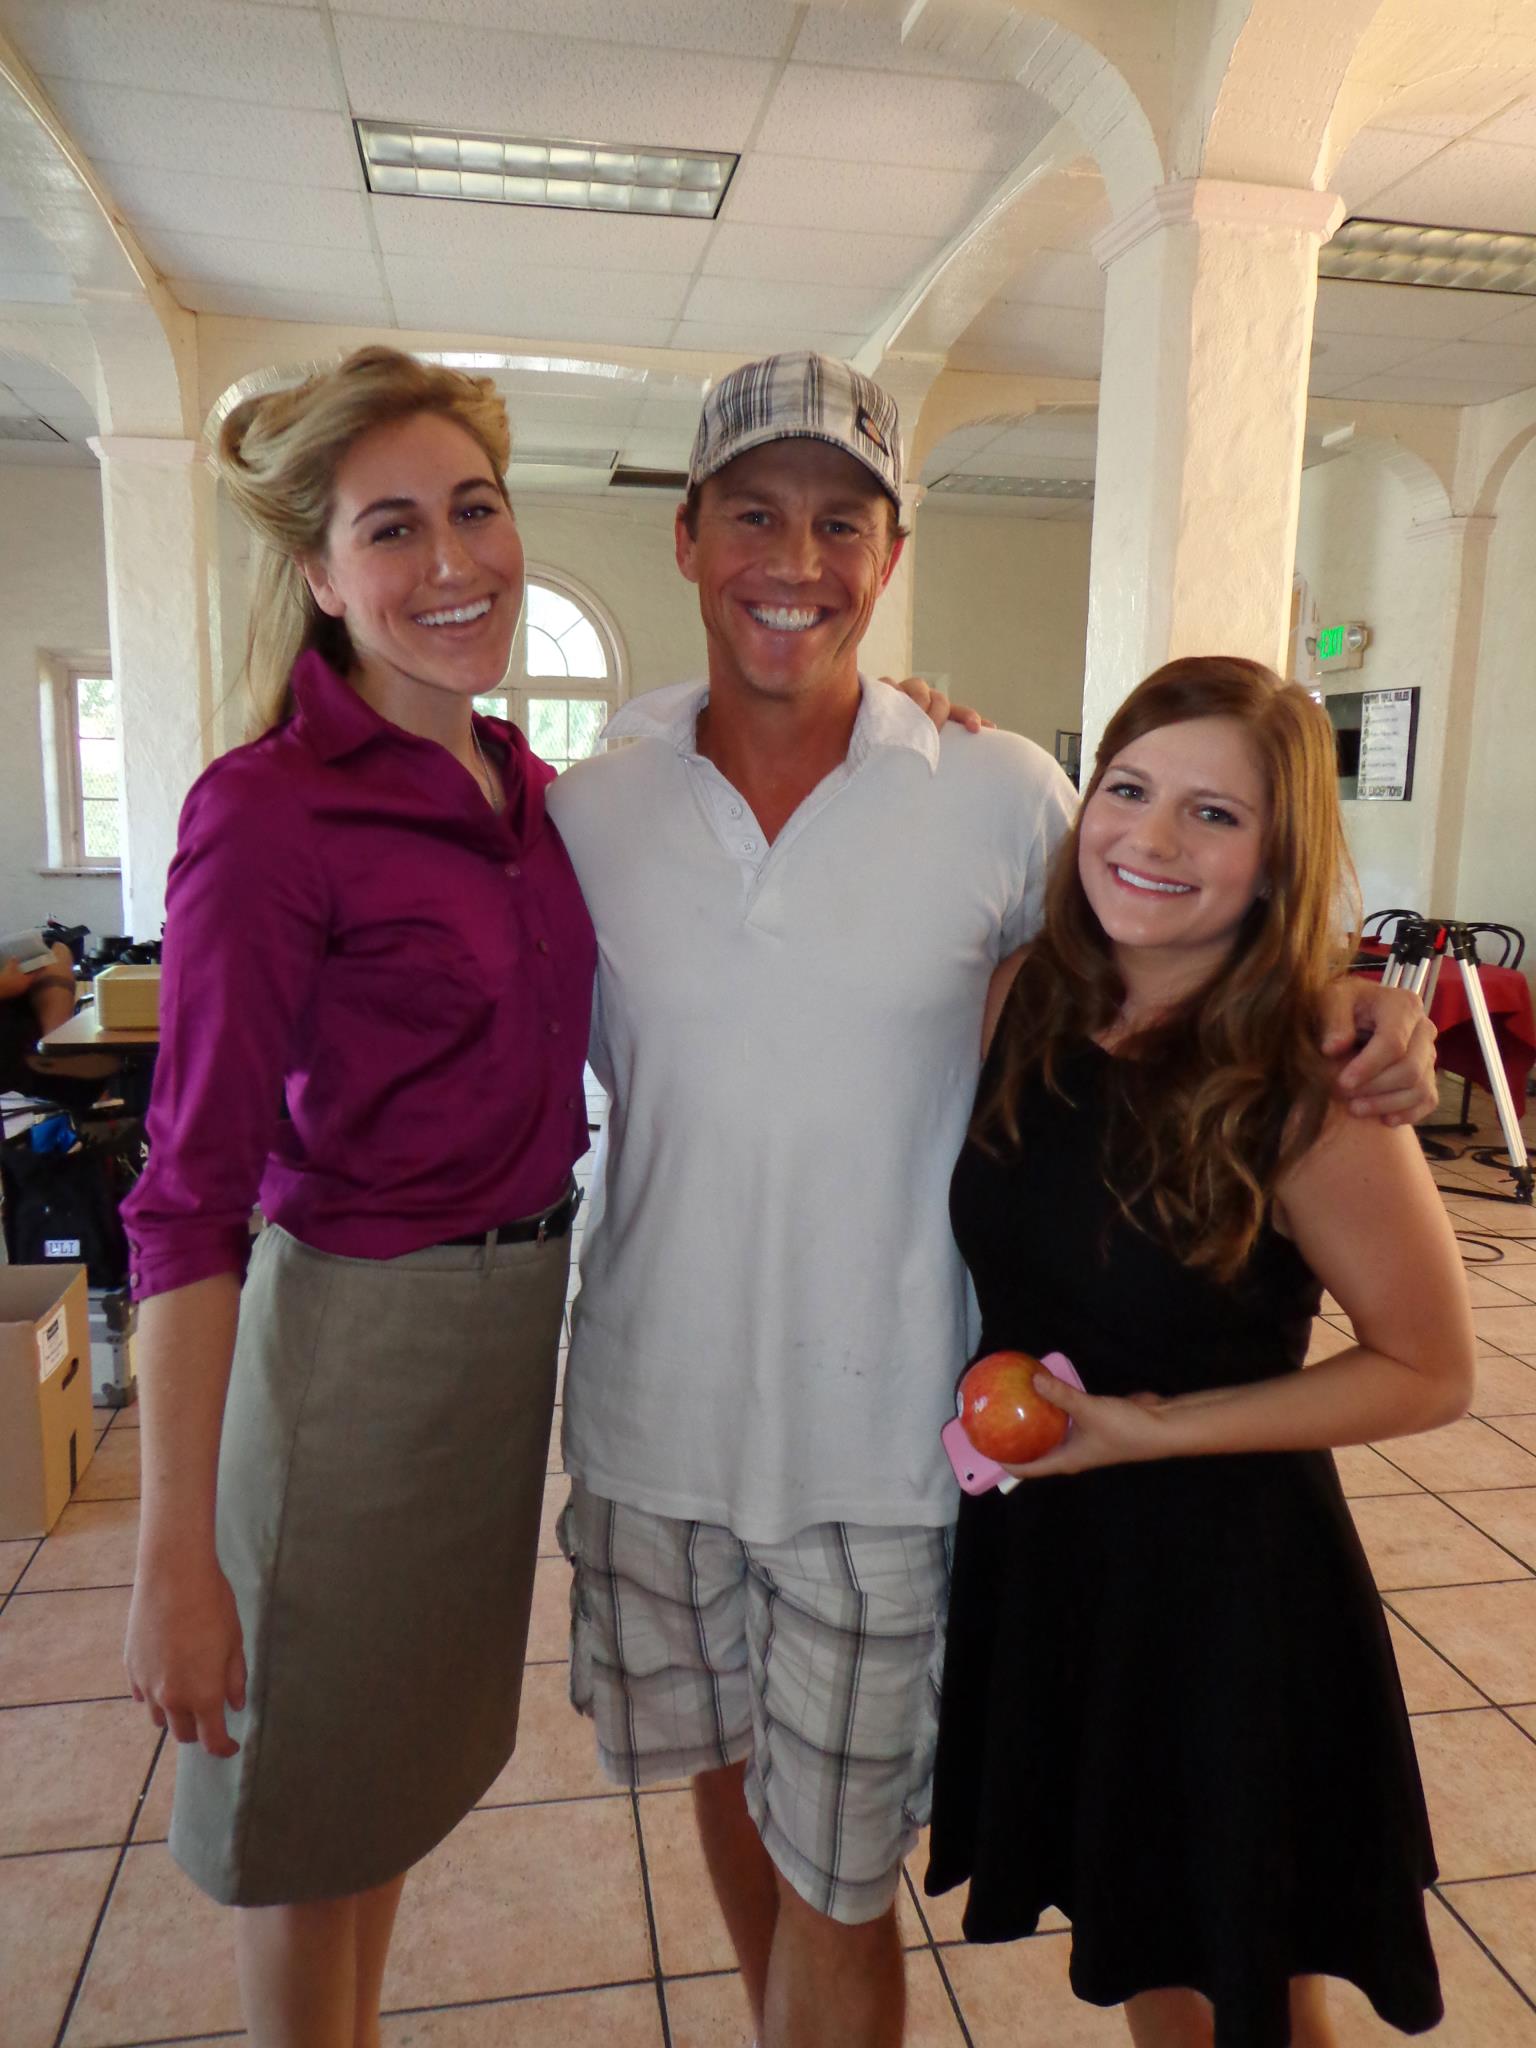 On the set of The Studio Club with dictator Brian Krause